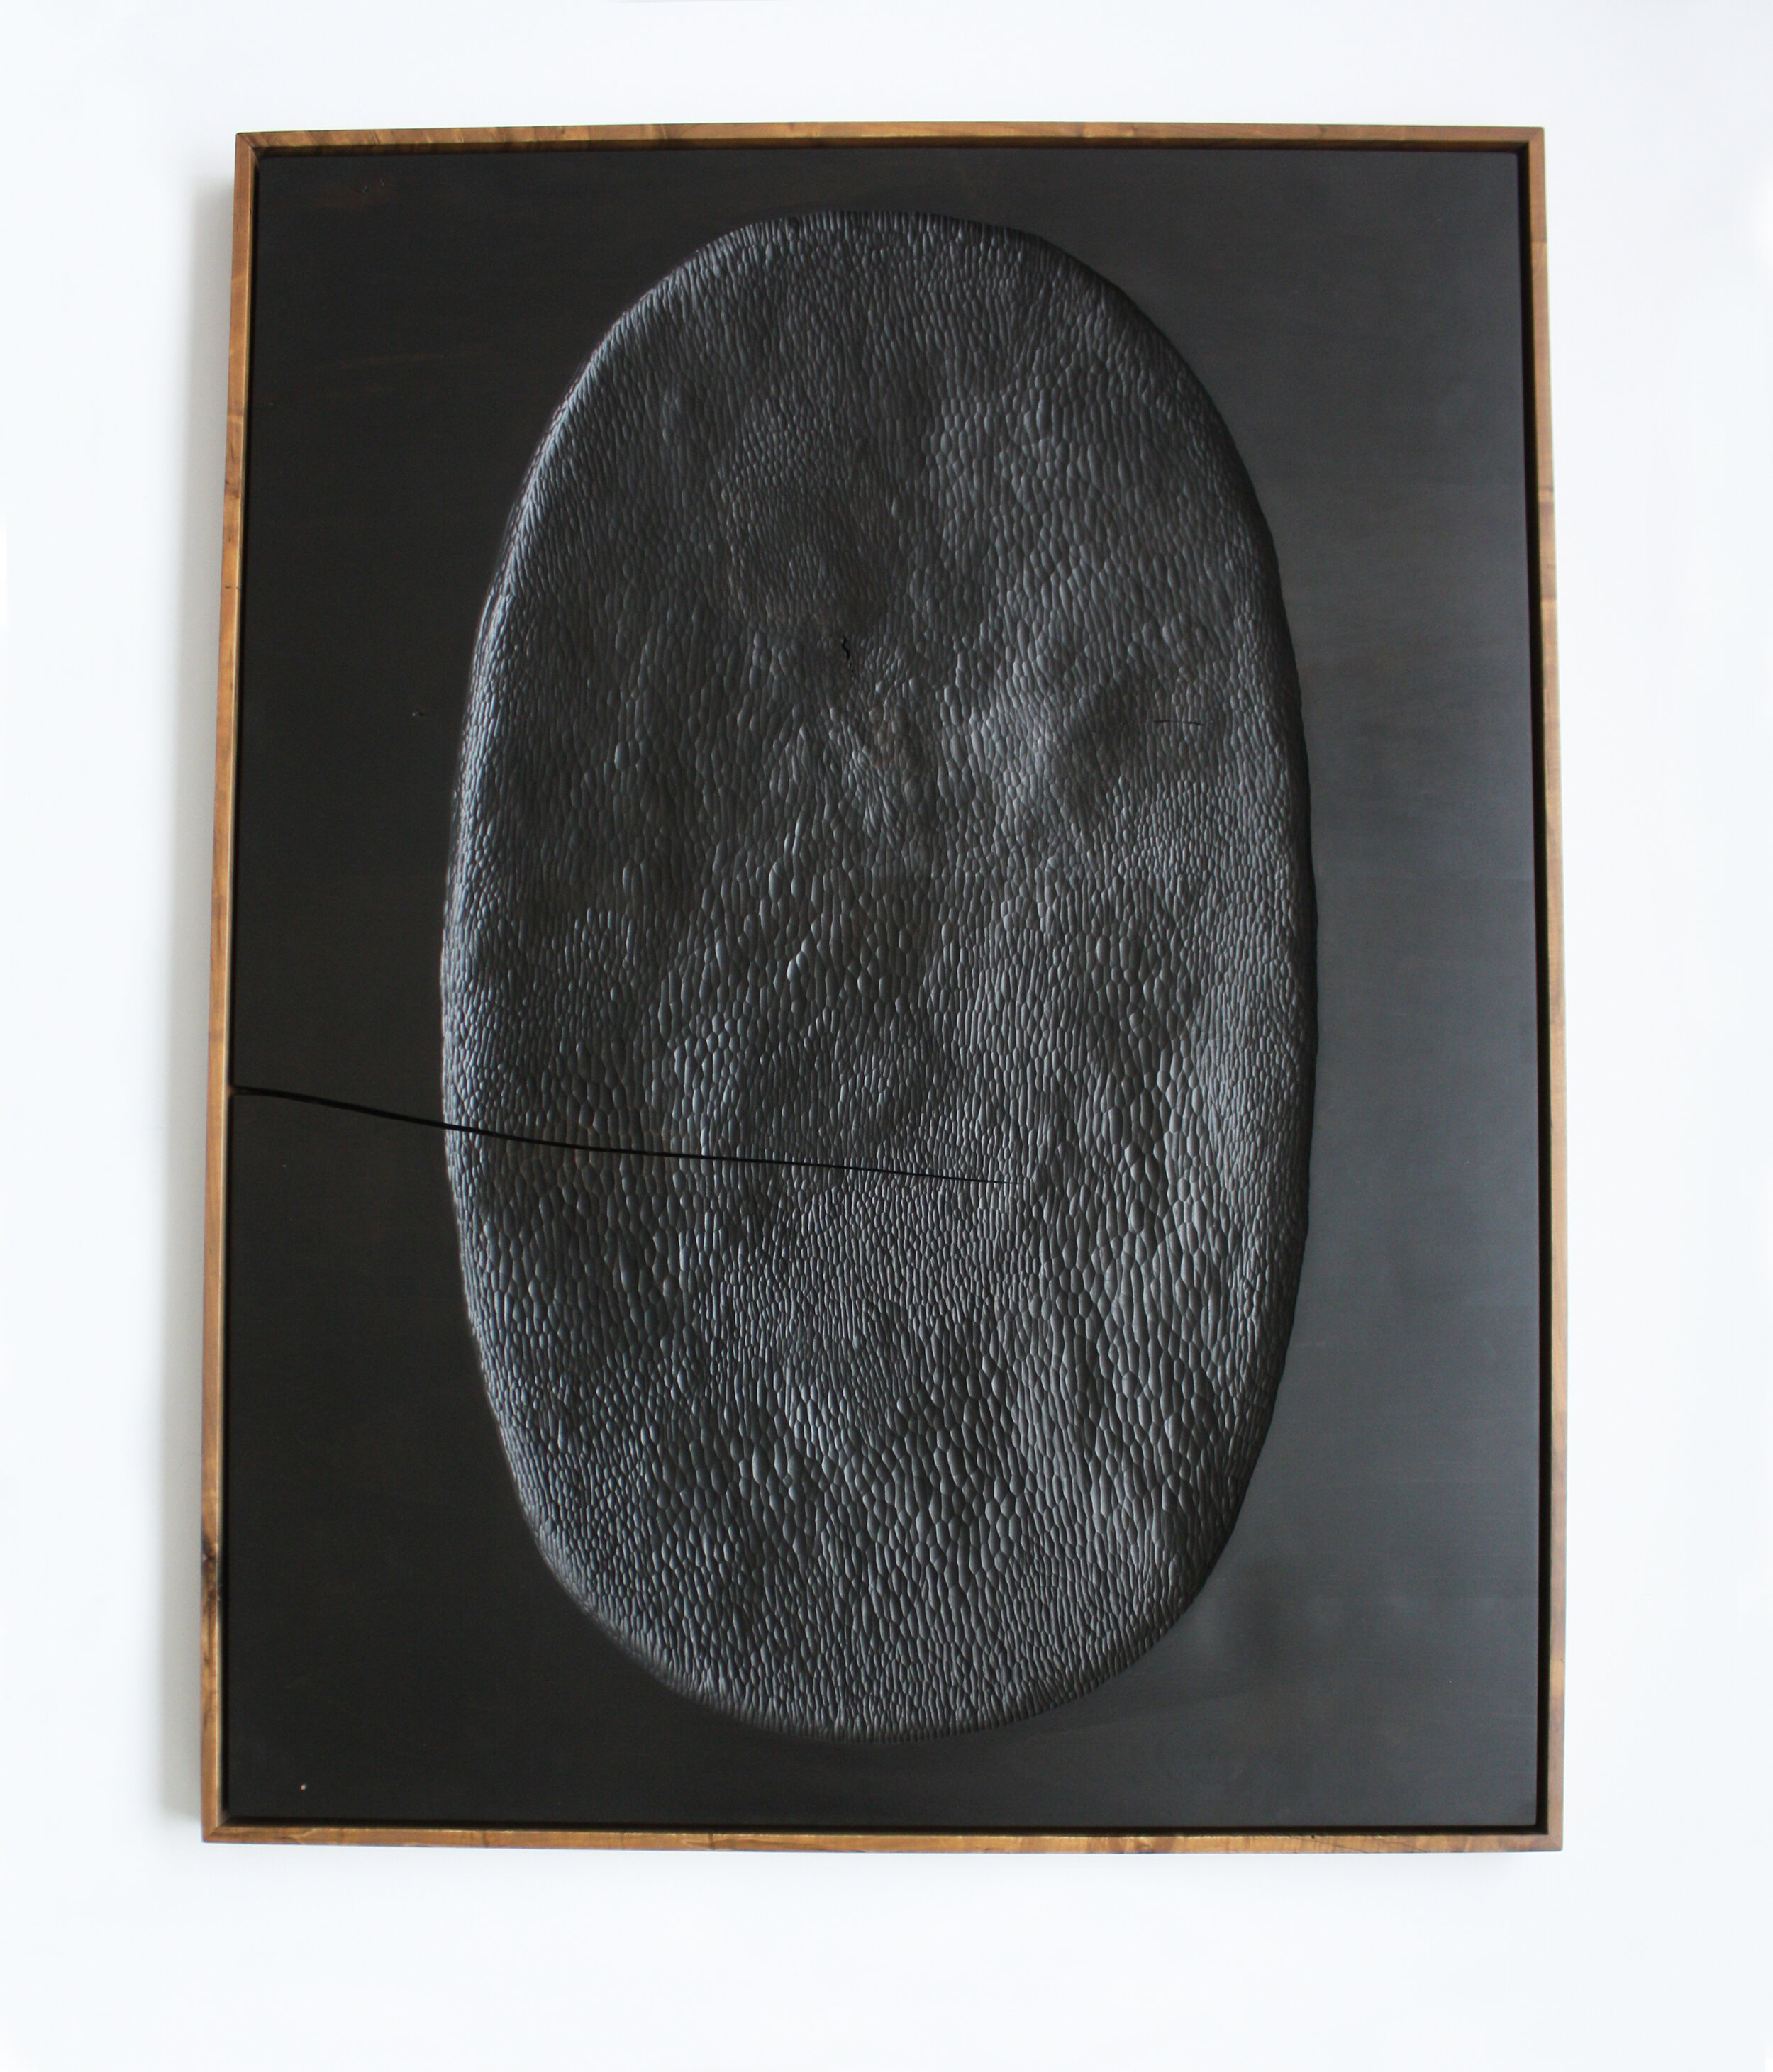 Black Painting (Oval), 2017